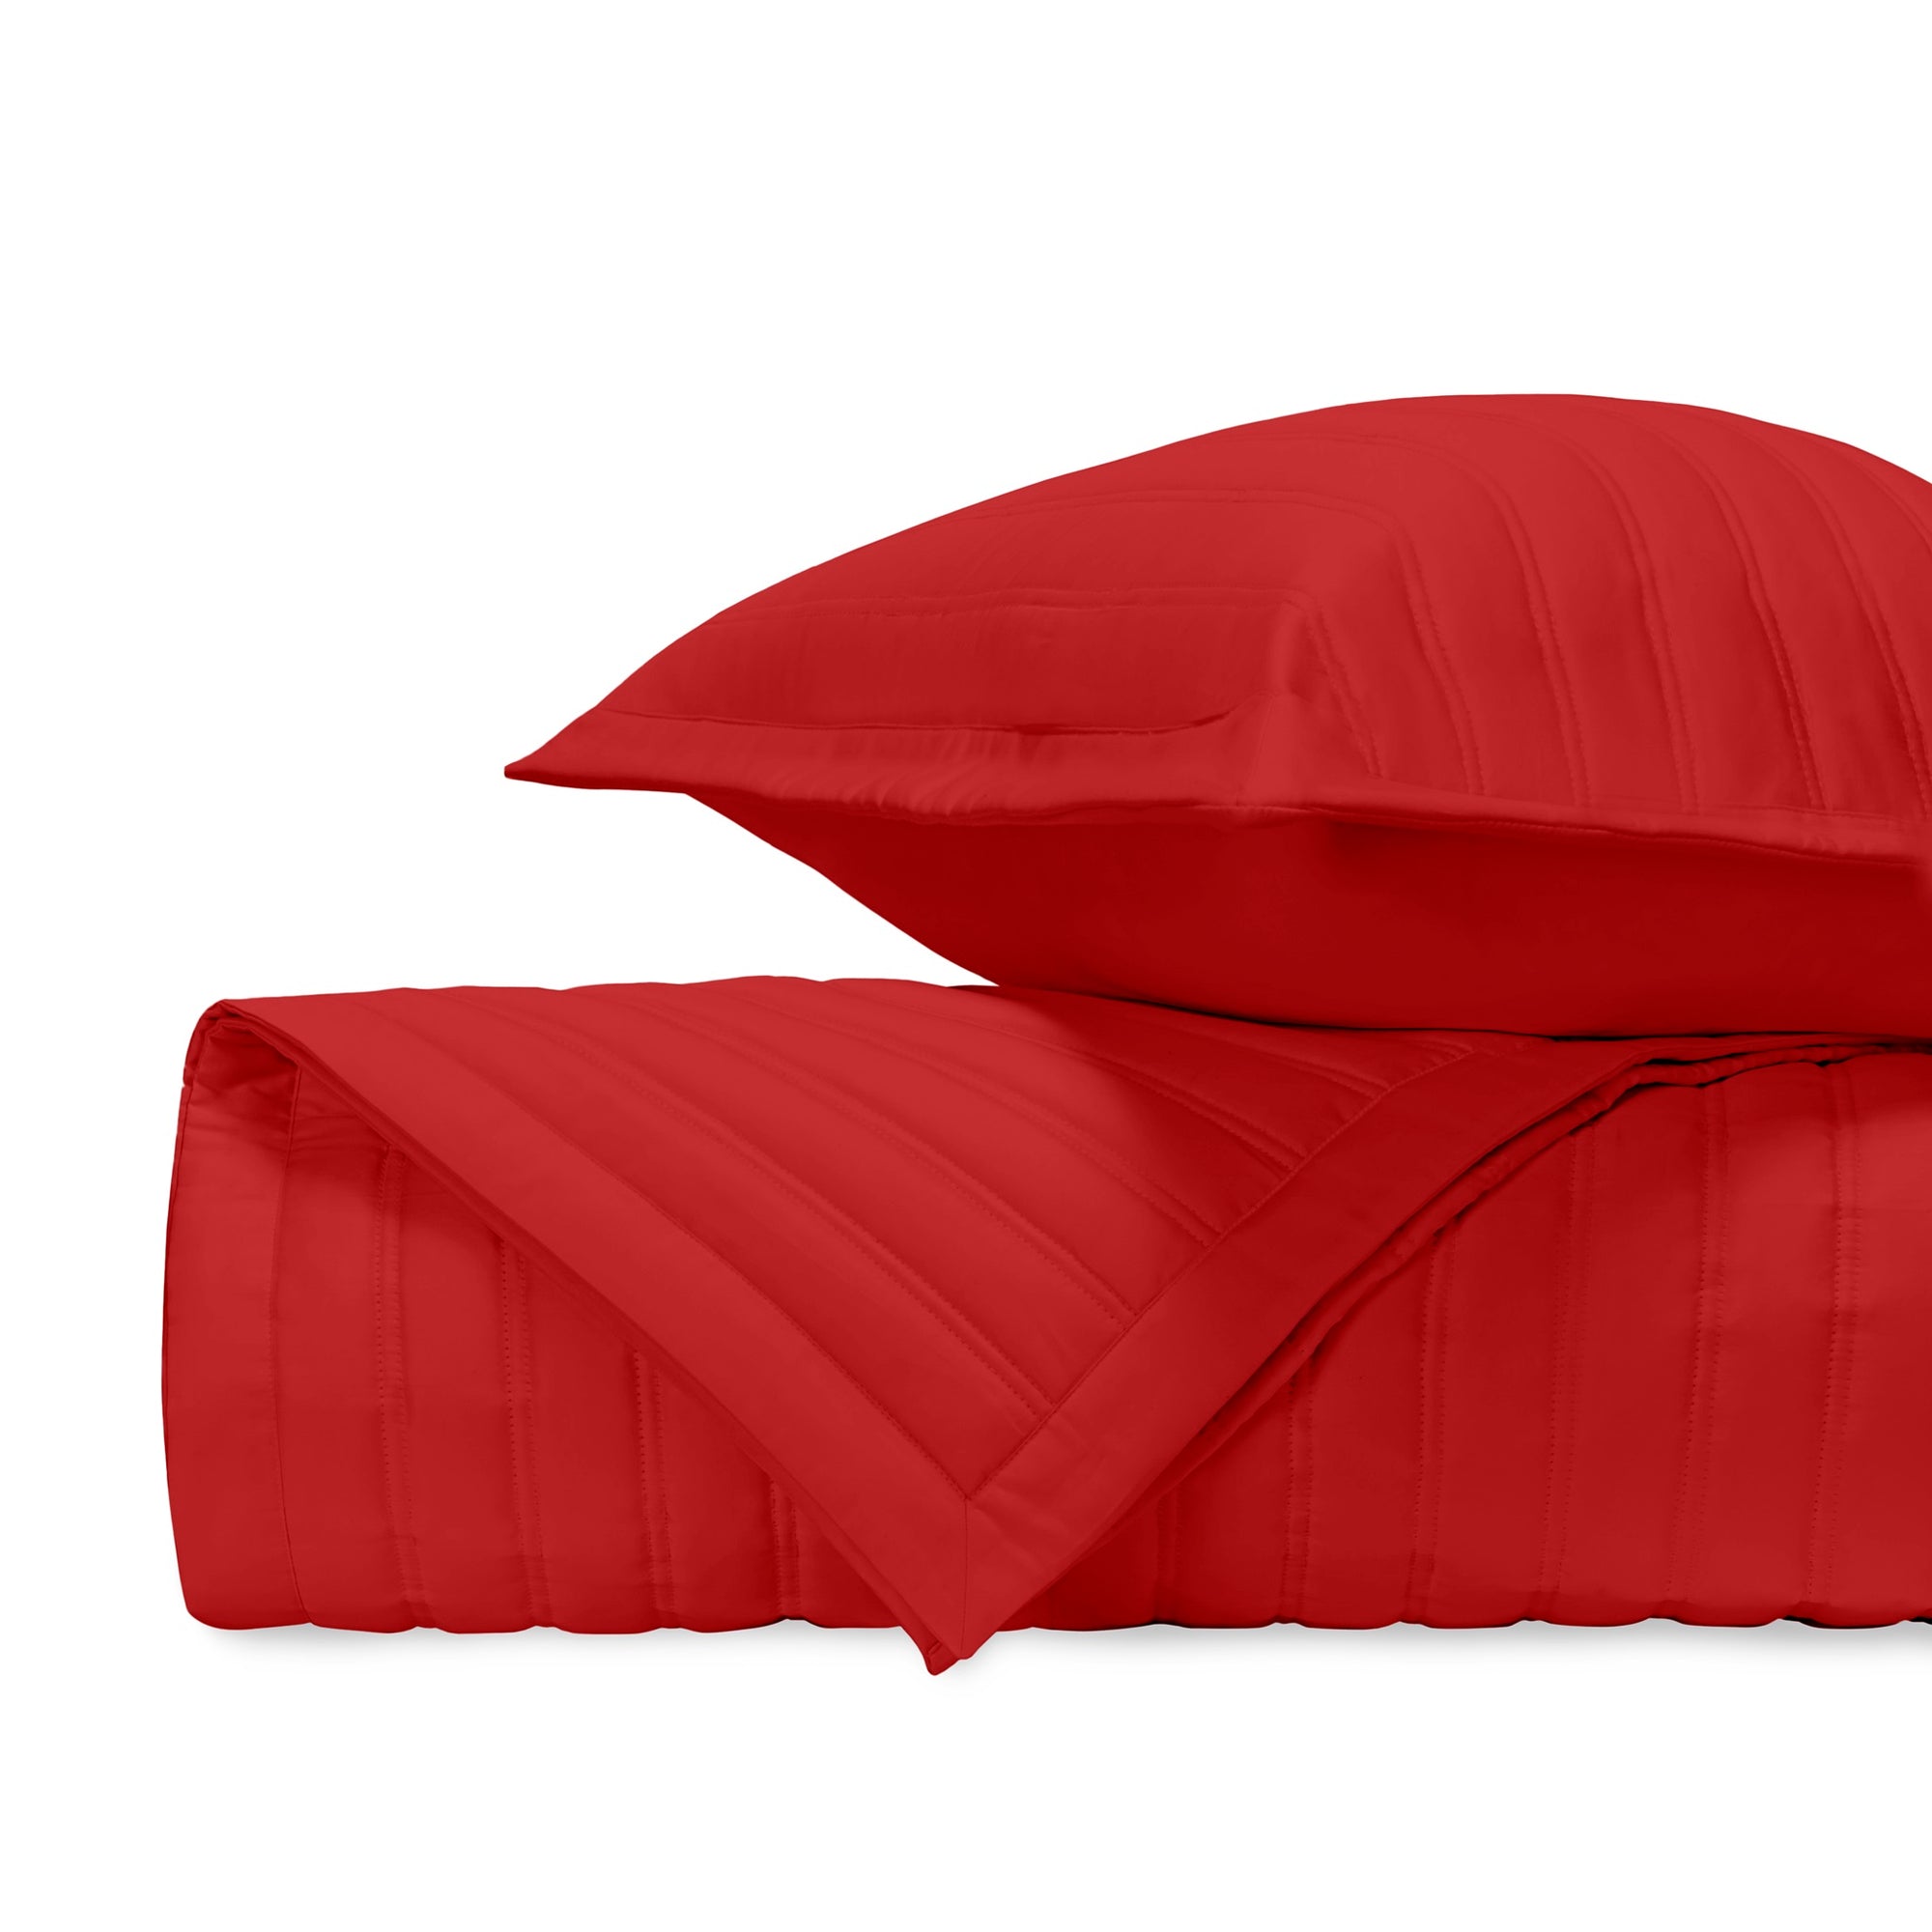 Stack Image of Home Treasures L'Avenue Royal Sateen Quilted Bedding in Color Bright Red